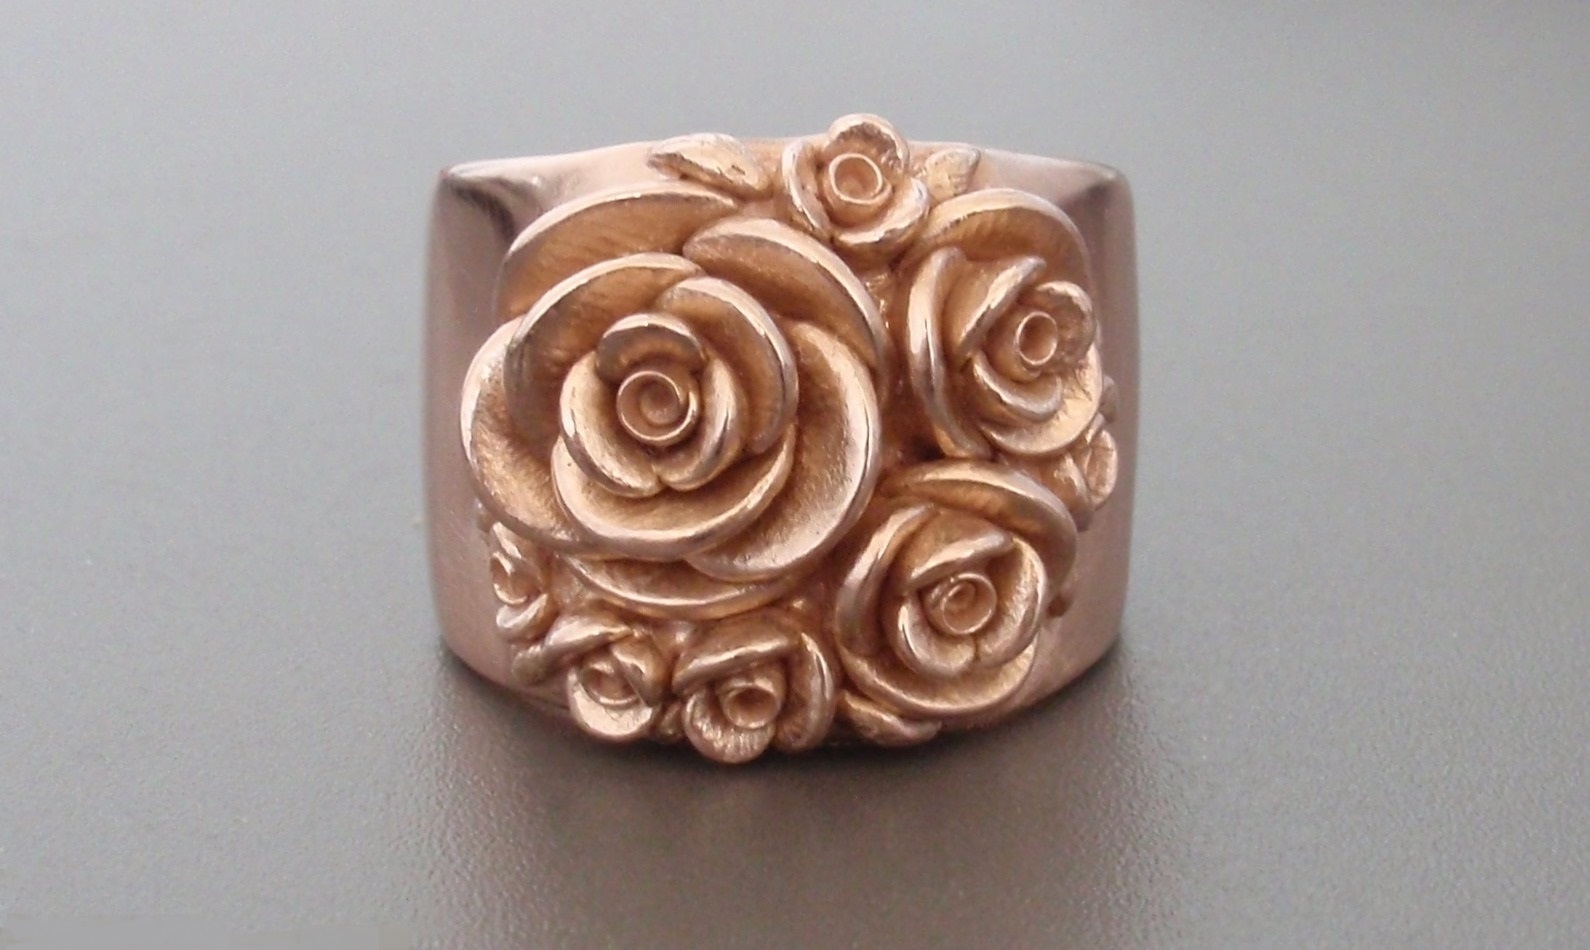  Bouquet of Roses, Wide-Band Ring, in 14K Rose Gold. 